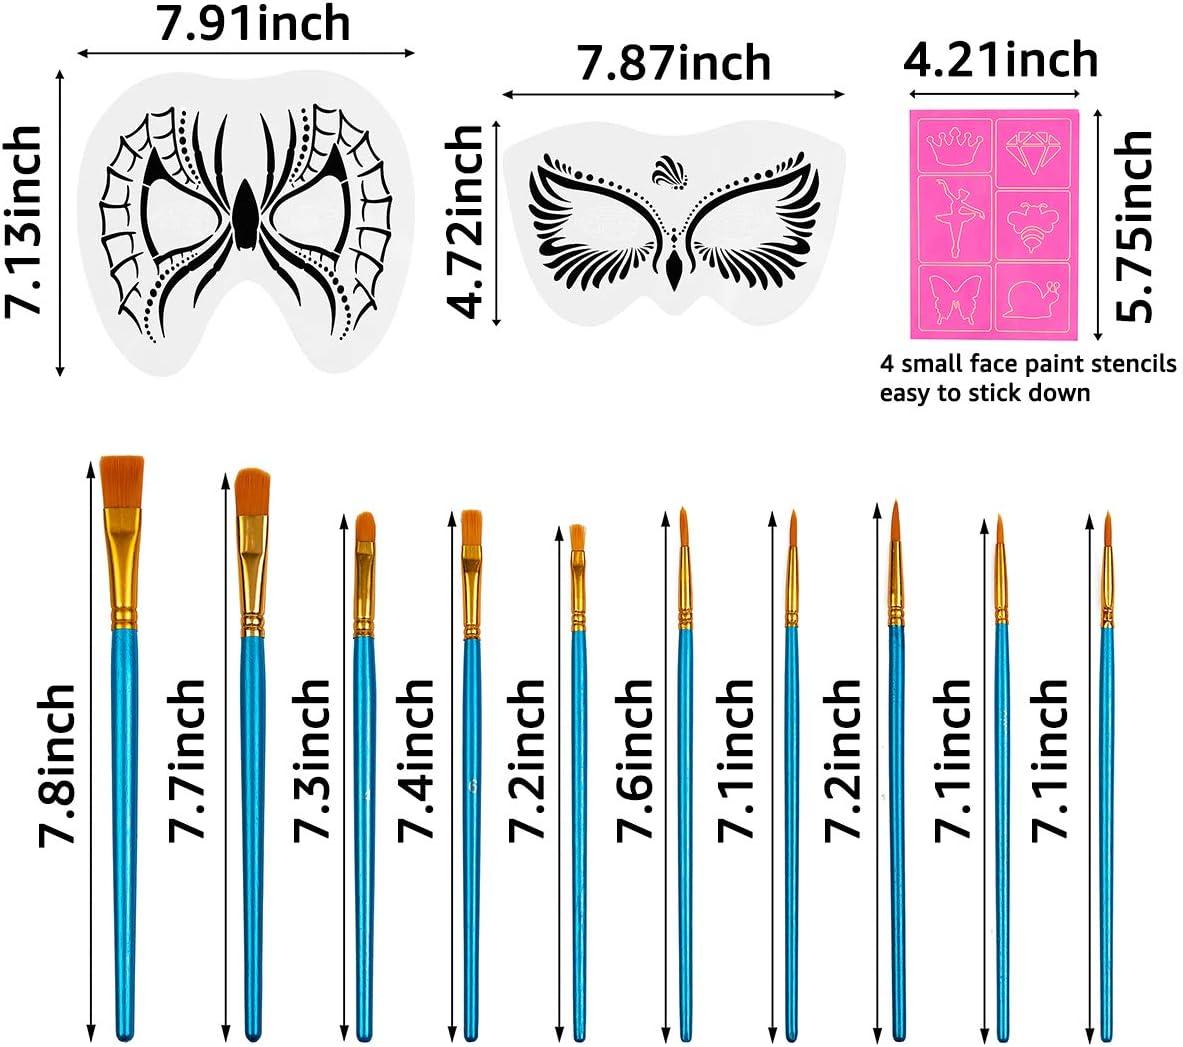 KINBOM 31pcs Face Paint Stencils Kit Includes 17 Reusable Large Face  Painting Stencil, 4 Small Stick Paint Templates and 10 Brushes for Kids  Party